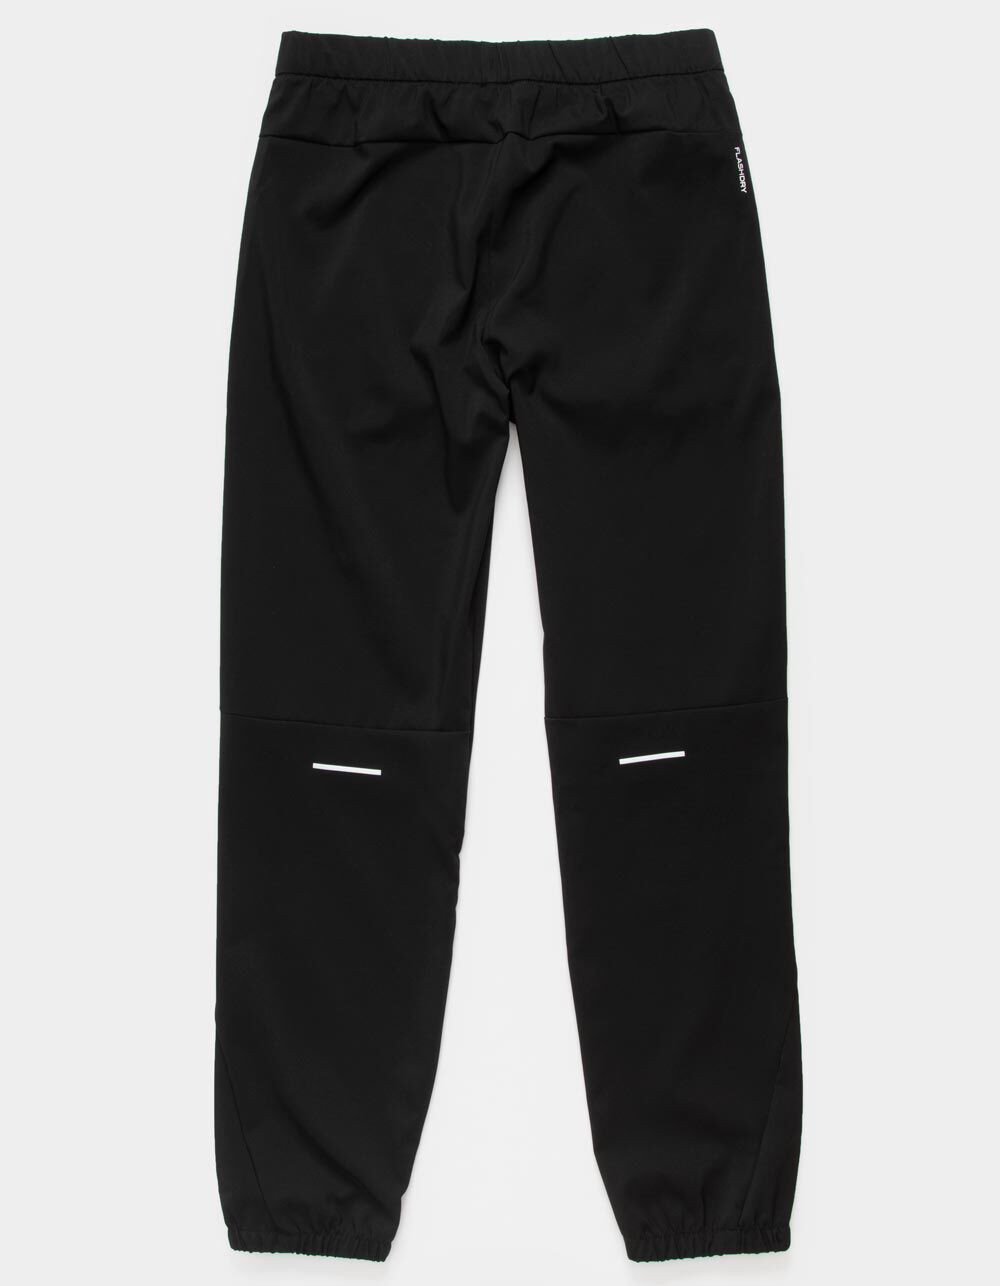 THE NORTH FACE On Mountain Boys Pants - BLACK | Tillys